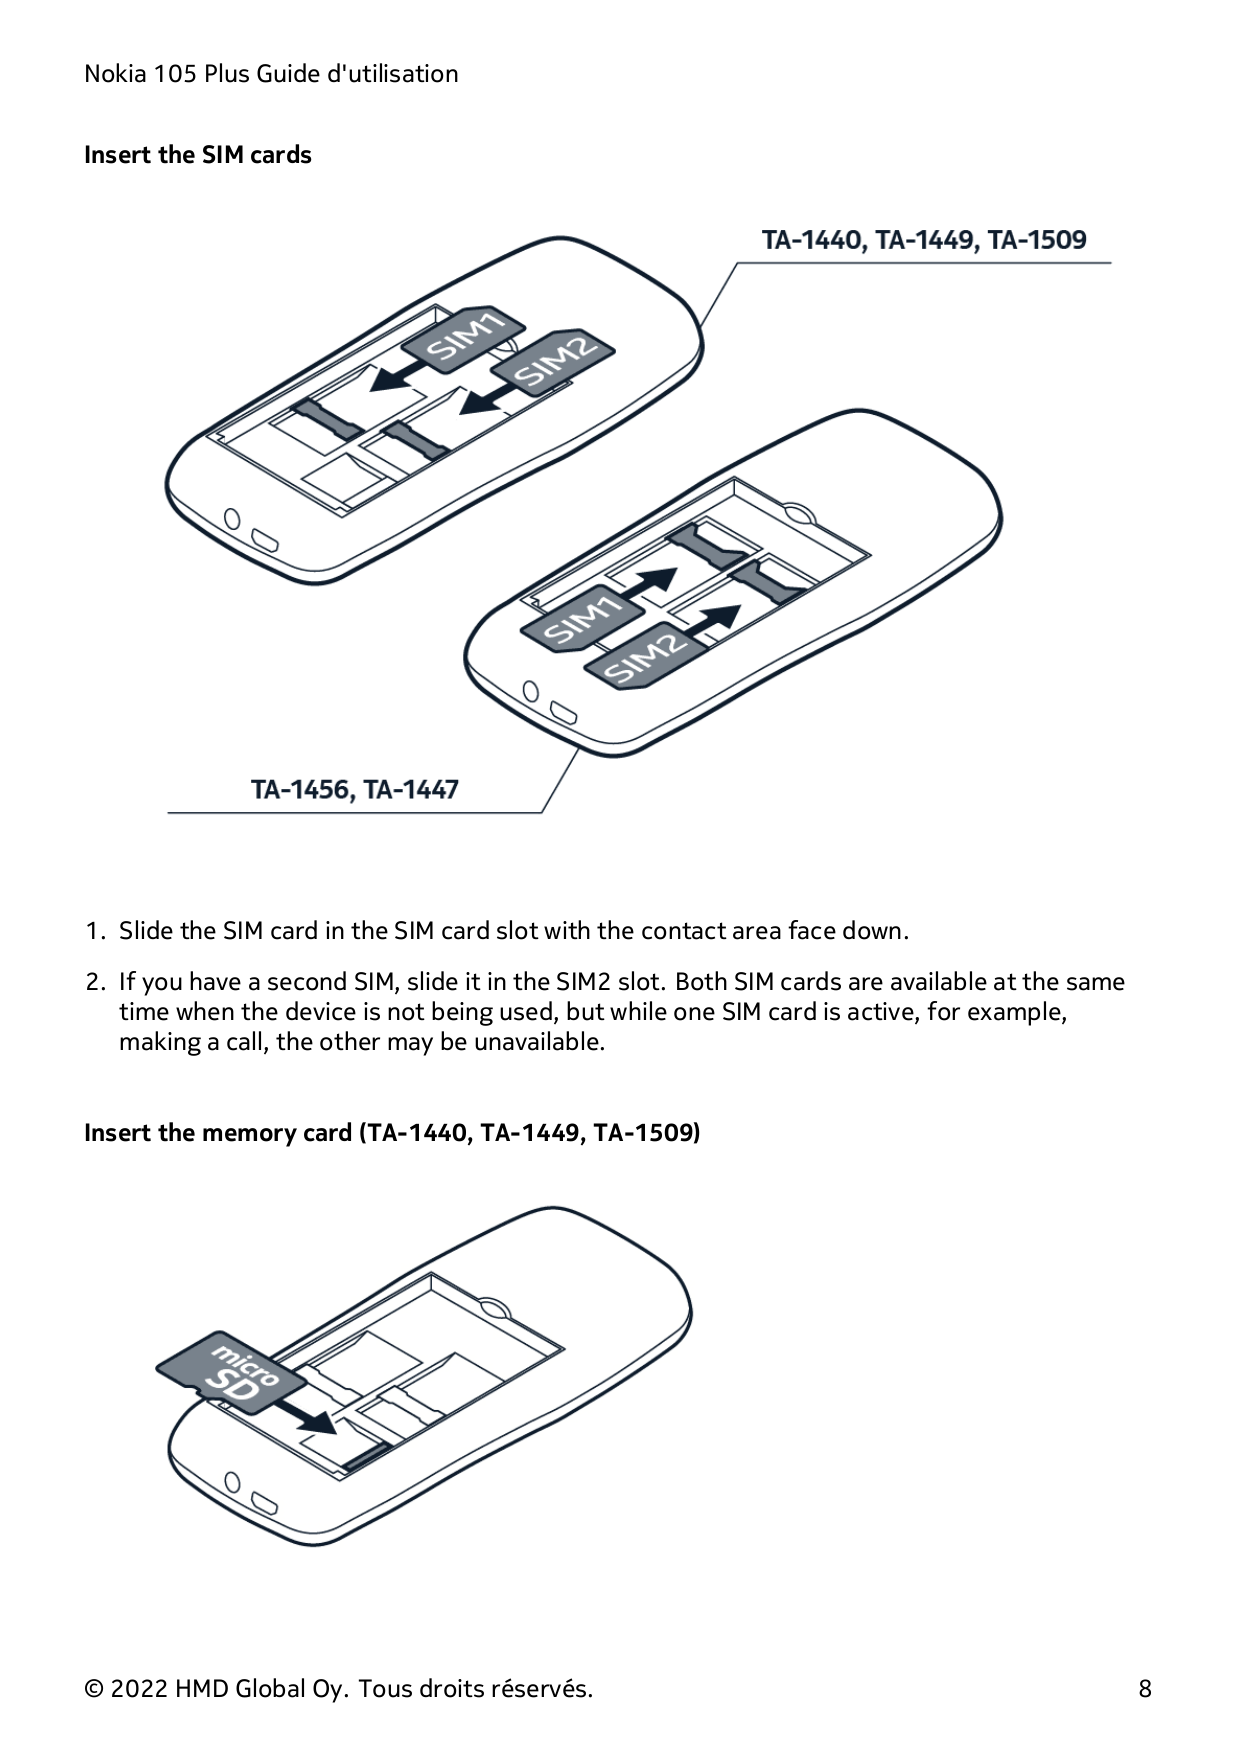 Nokia 105 Plus Guide d'utilisationInsert the SIM cards1. Slide the SIM card in the SIM card slot with the contact area face down